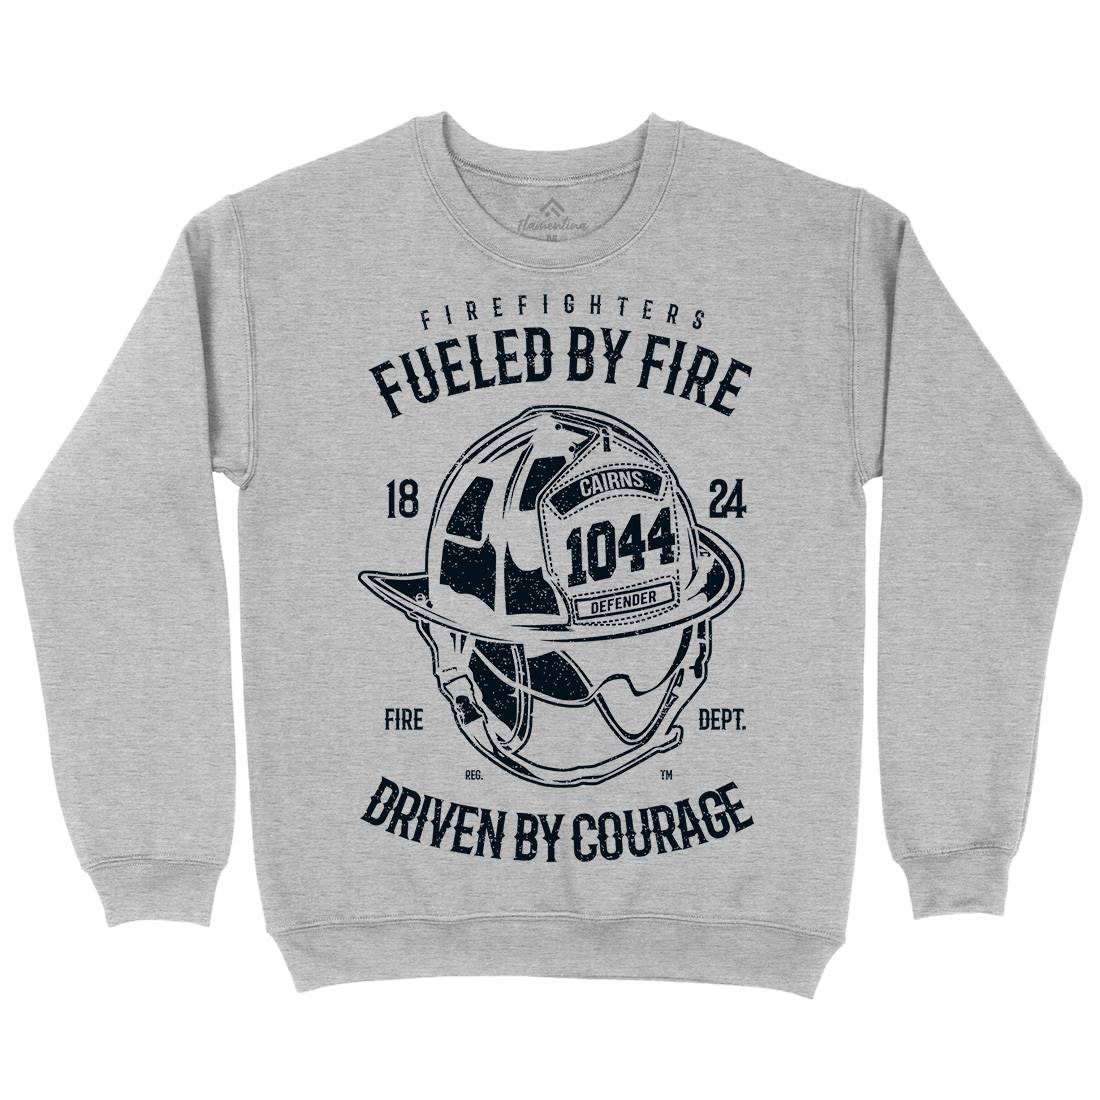 Fuelled By Fire Mens Crew Neck Sweatshirt Firefighters A667